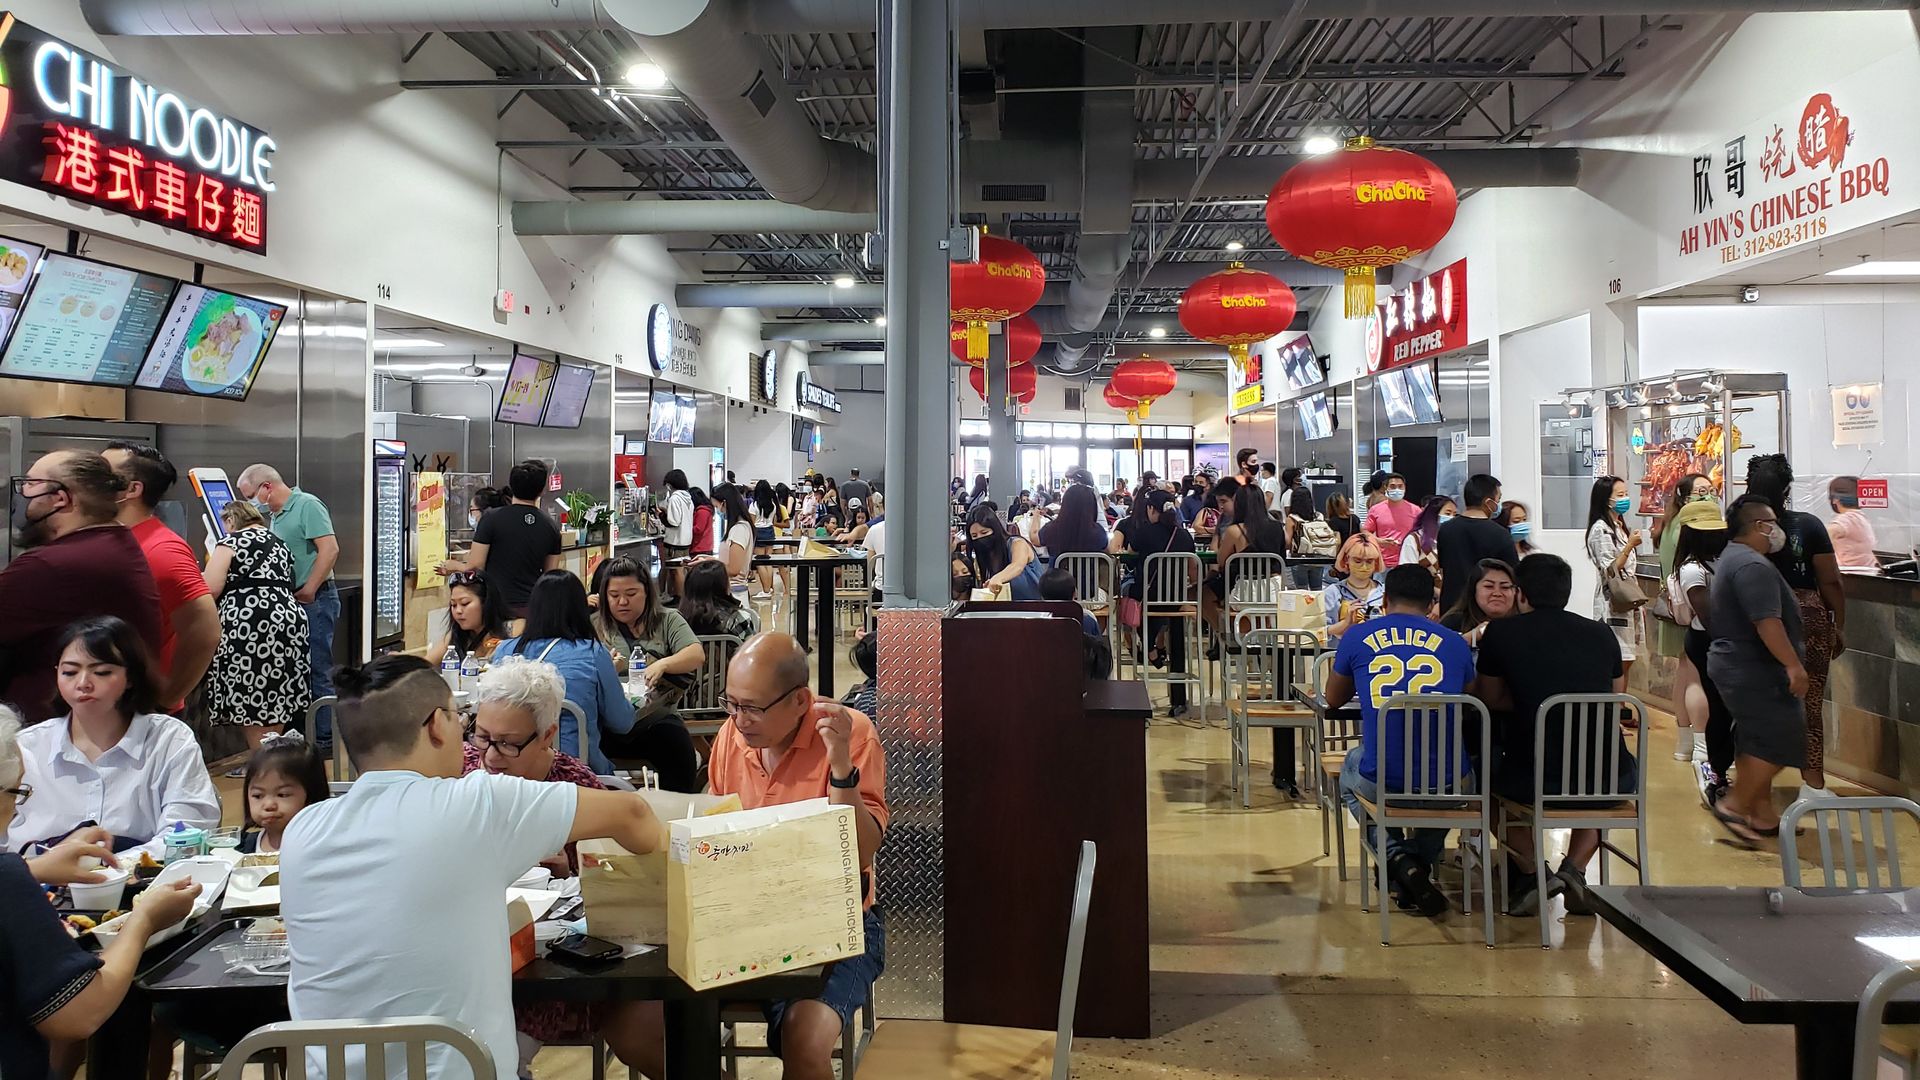 The food court at a mall in Aurora, Ill., meant to attract people of Asian descent.